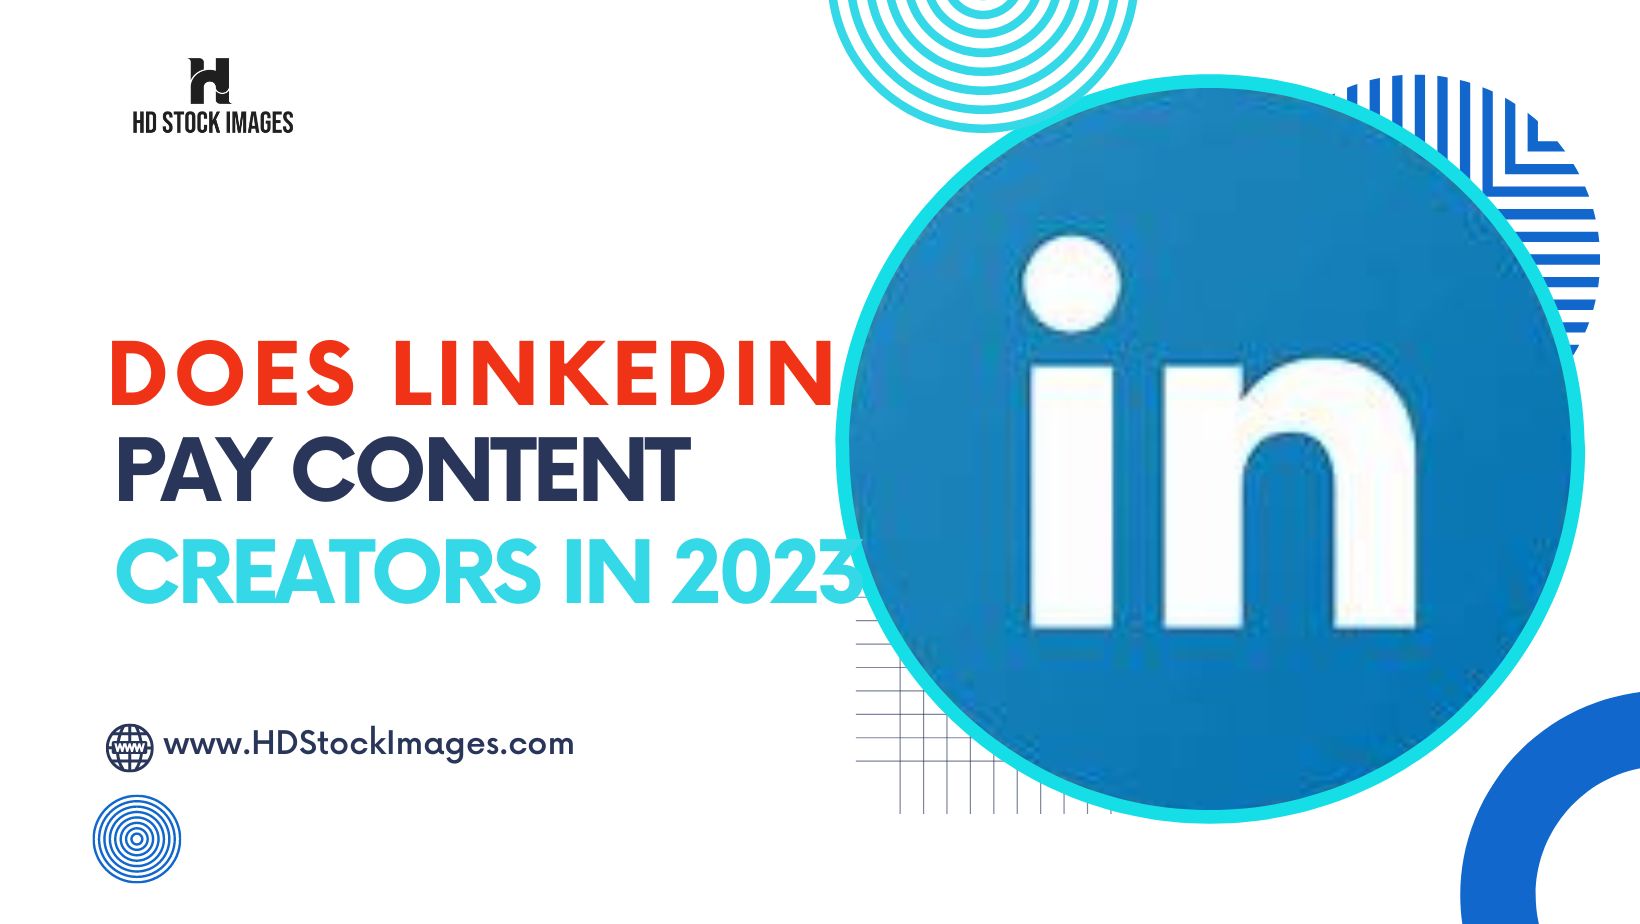 An image of Does Linkedin Pay Content Creators in 2023